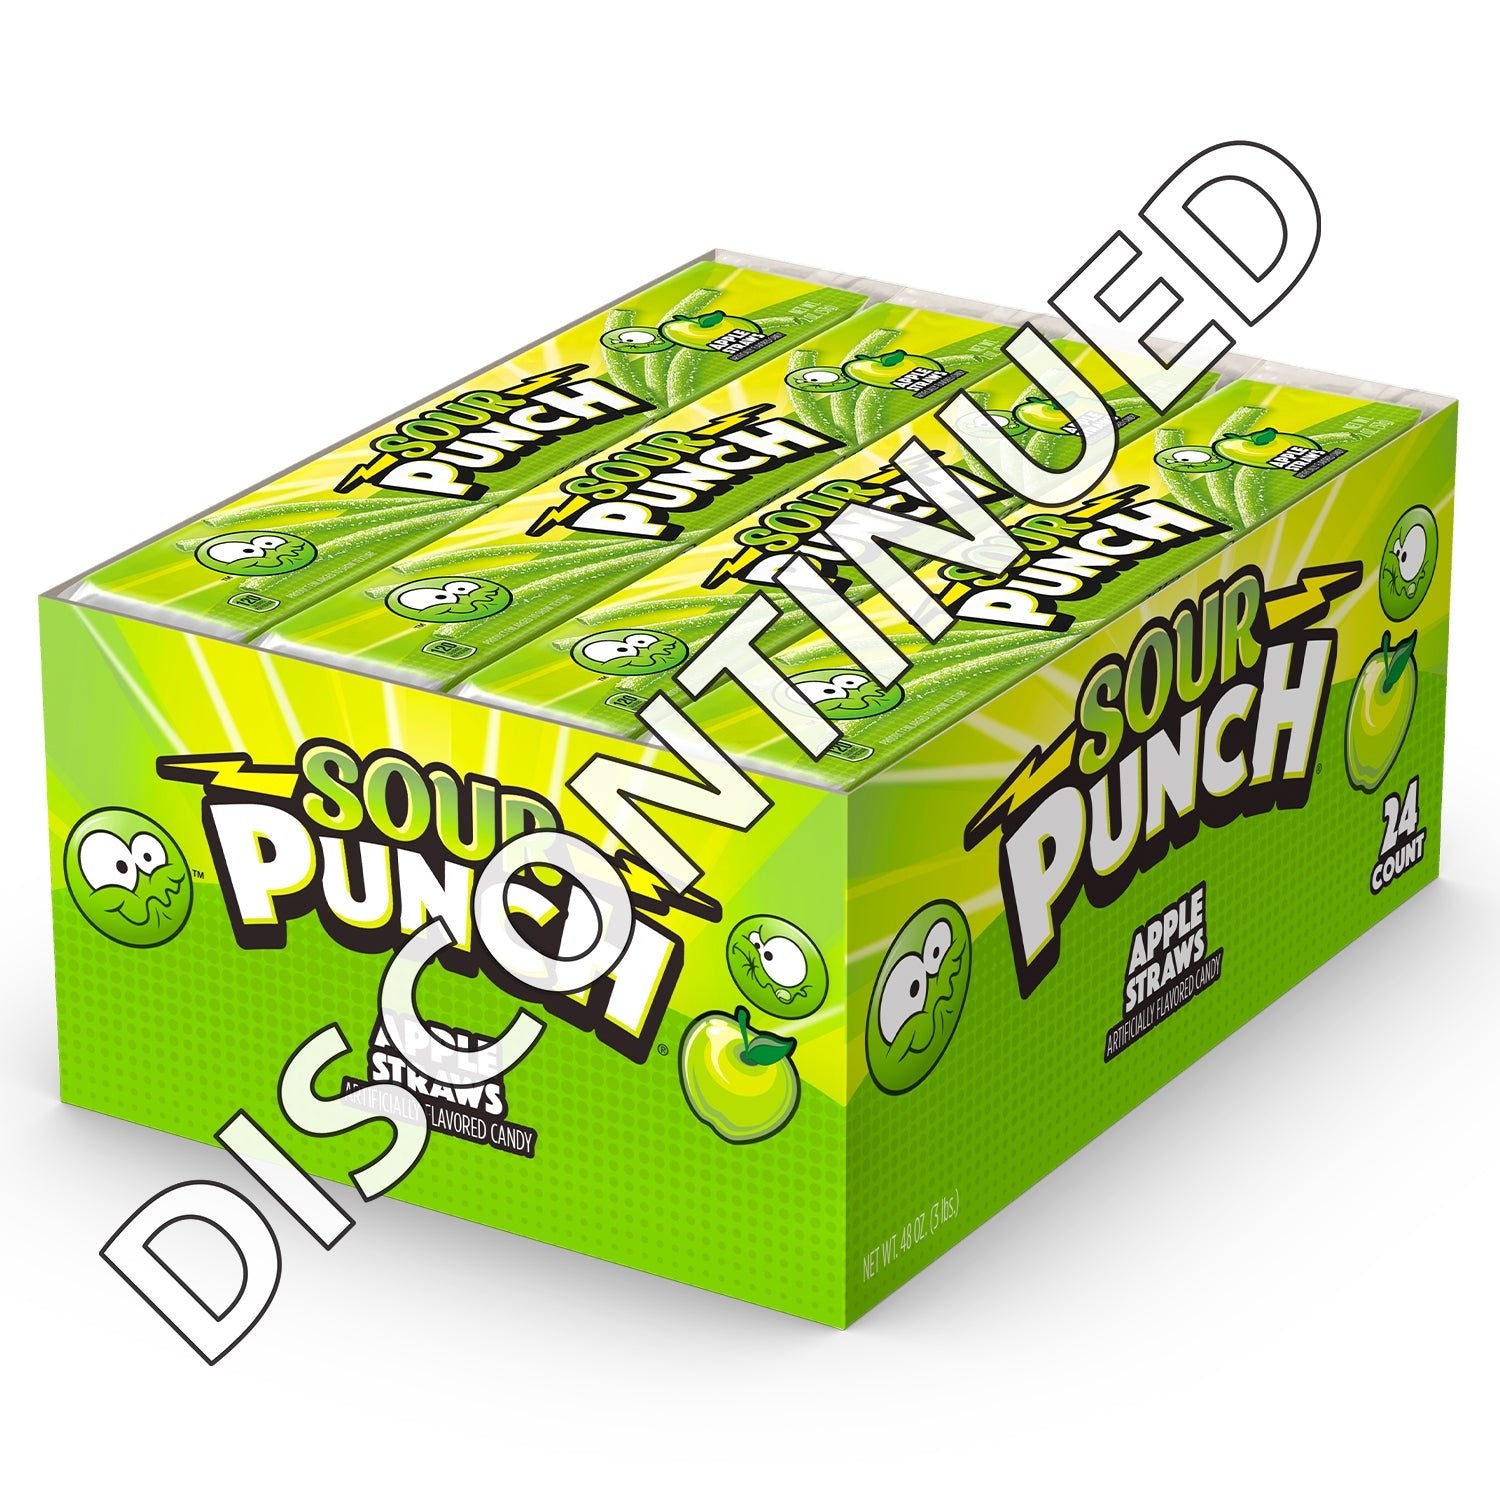 24 count pack of 2oz Sour Punch Apple Straws Candy has been discontinued